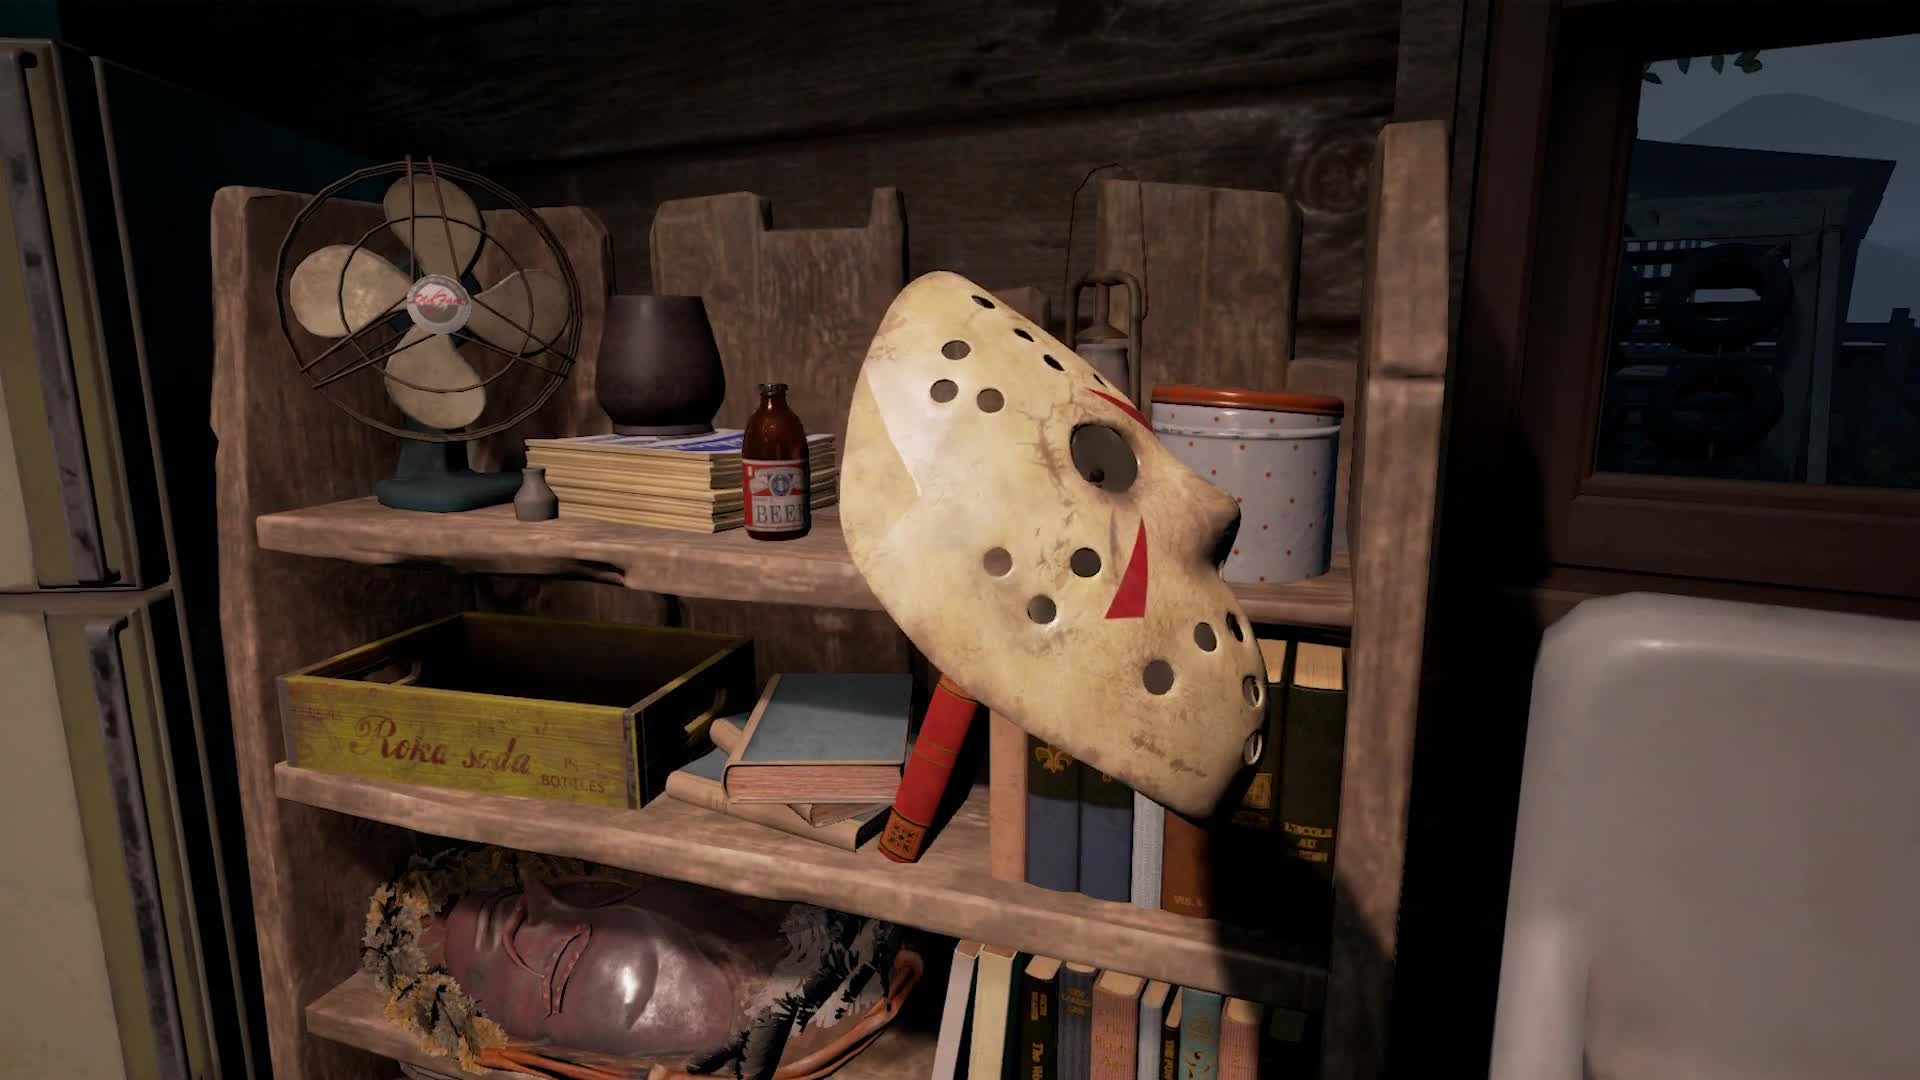 Friday the 13th - Virtual Cabin 2.0 trailer